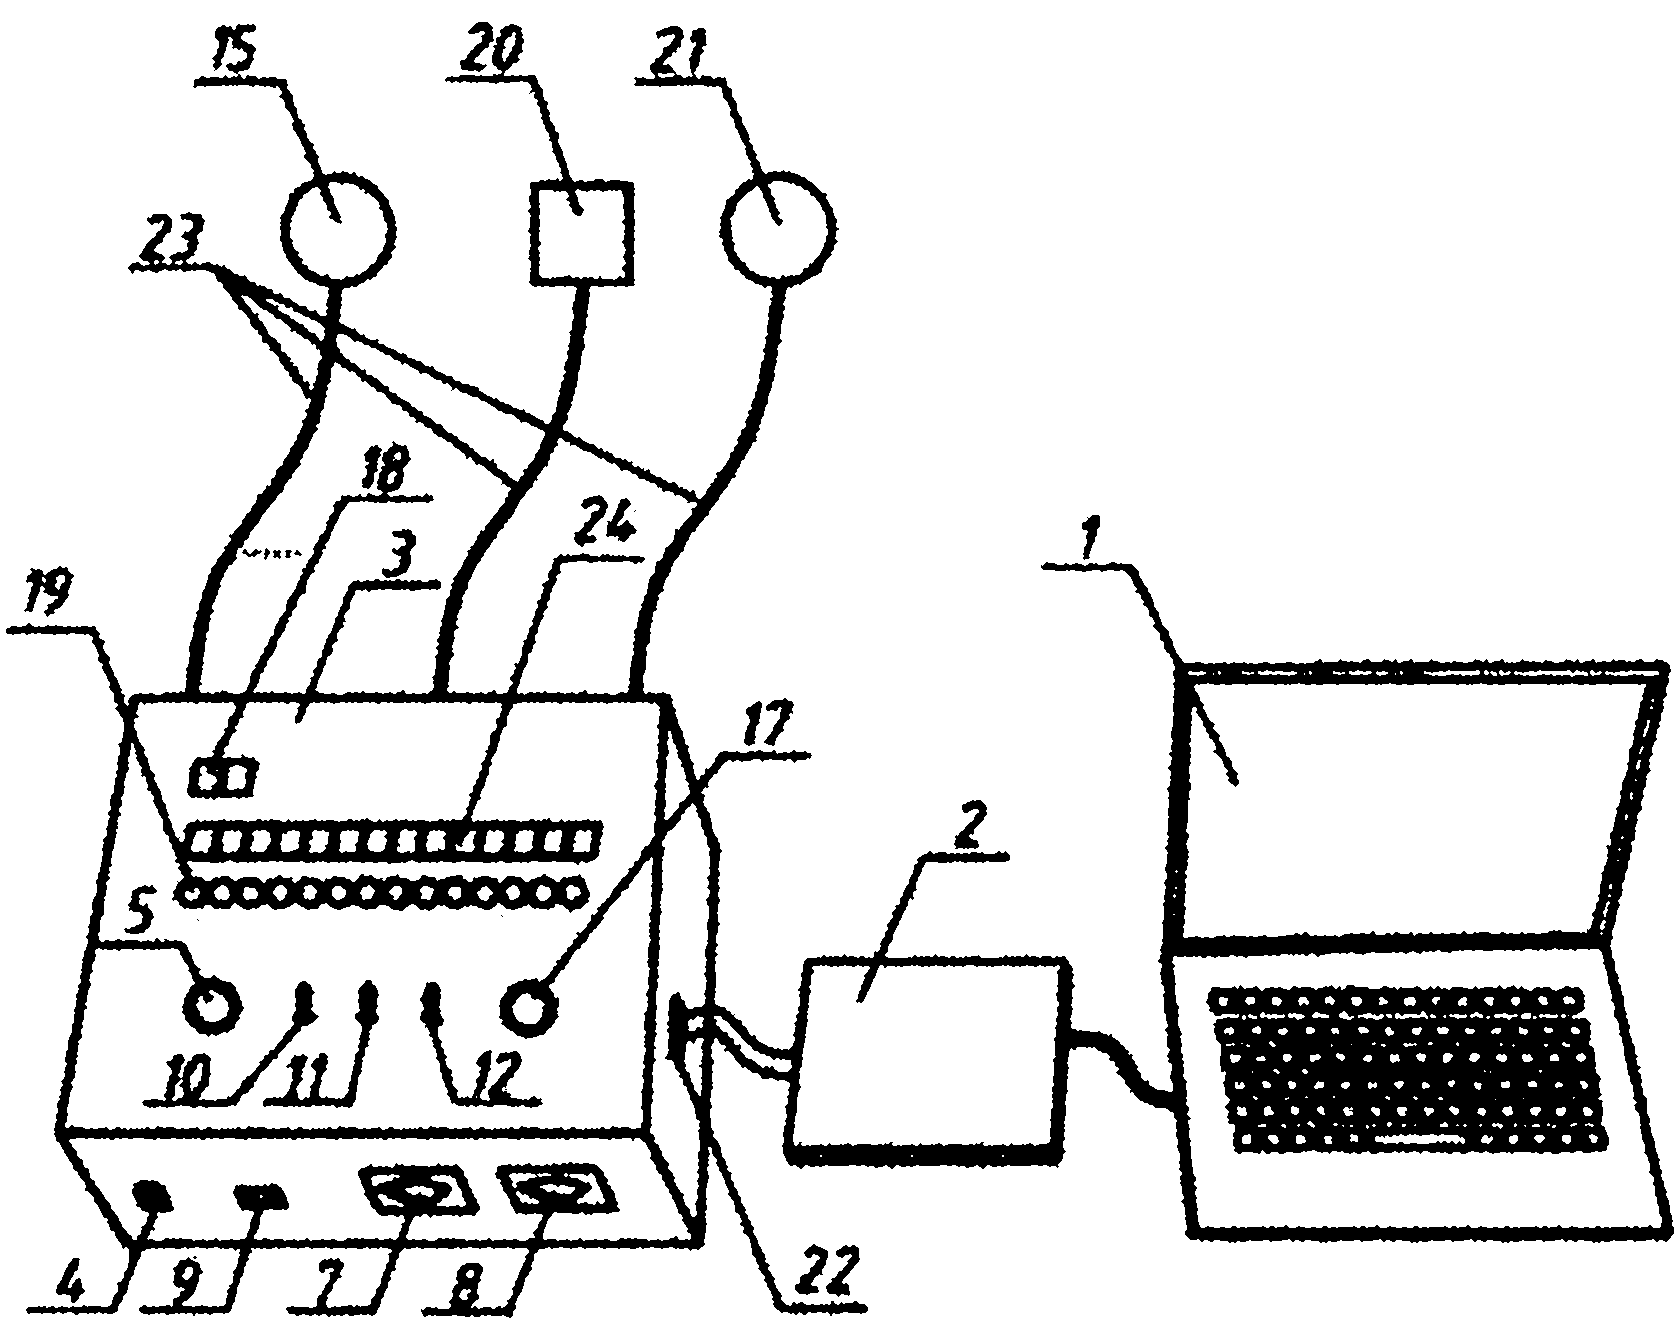 Portable measuring and controlling system for rocket engine ground tests